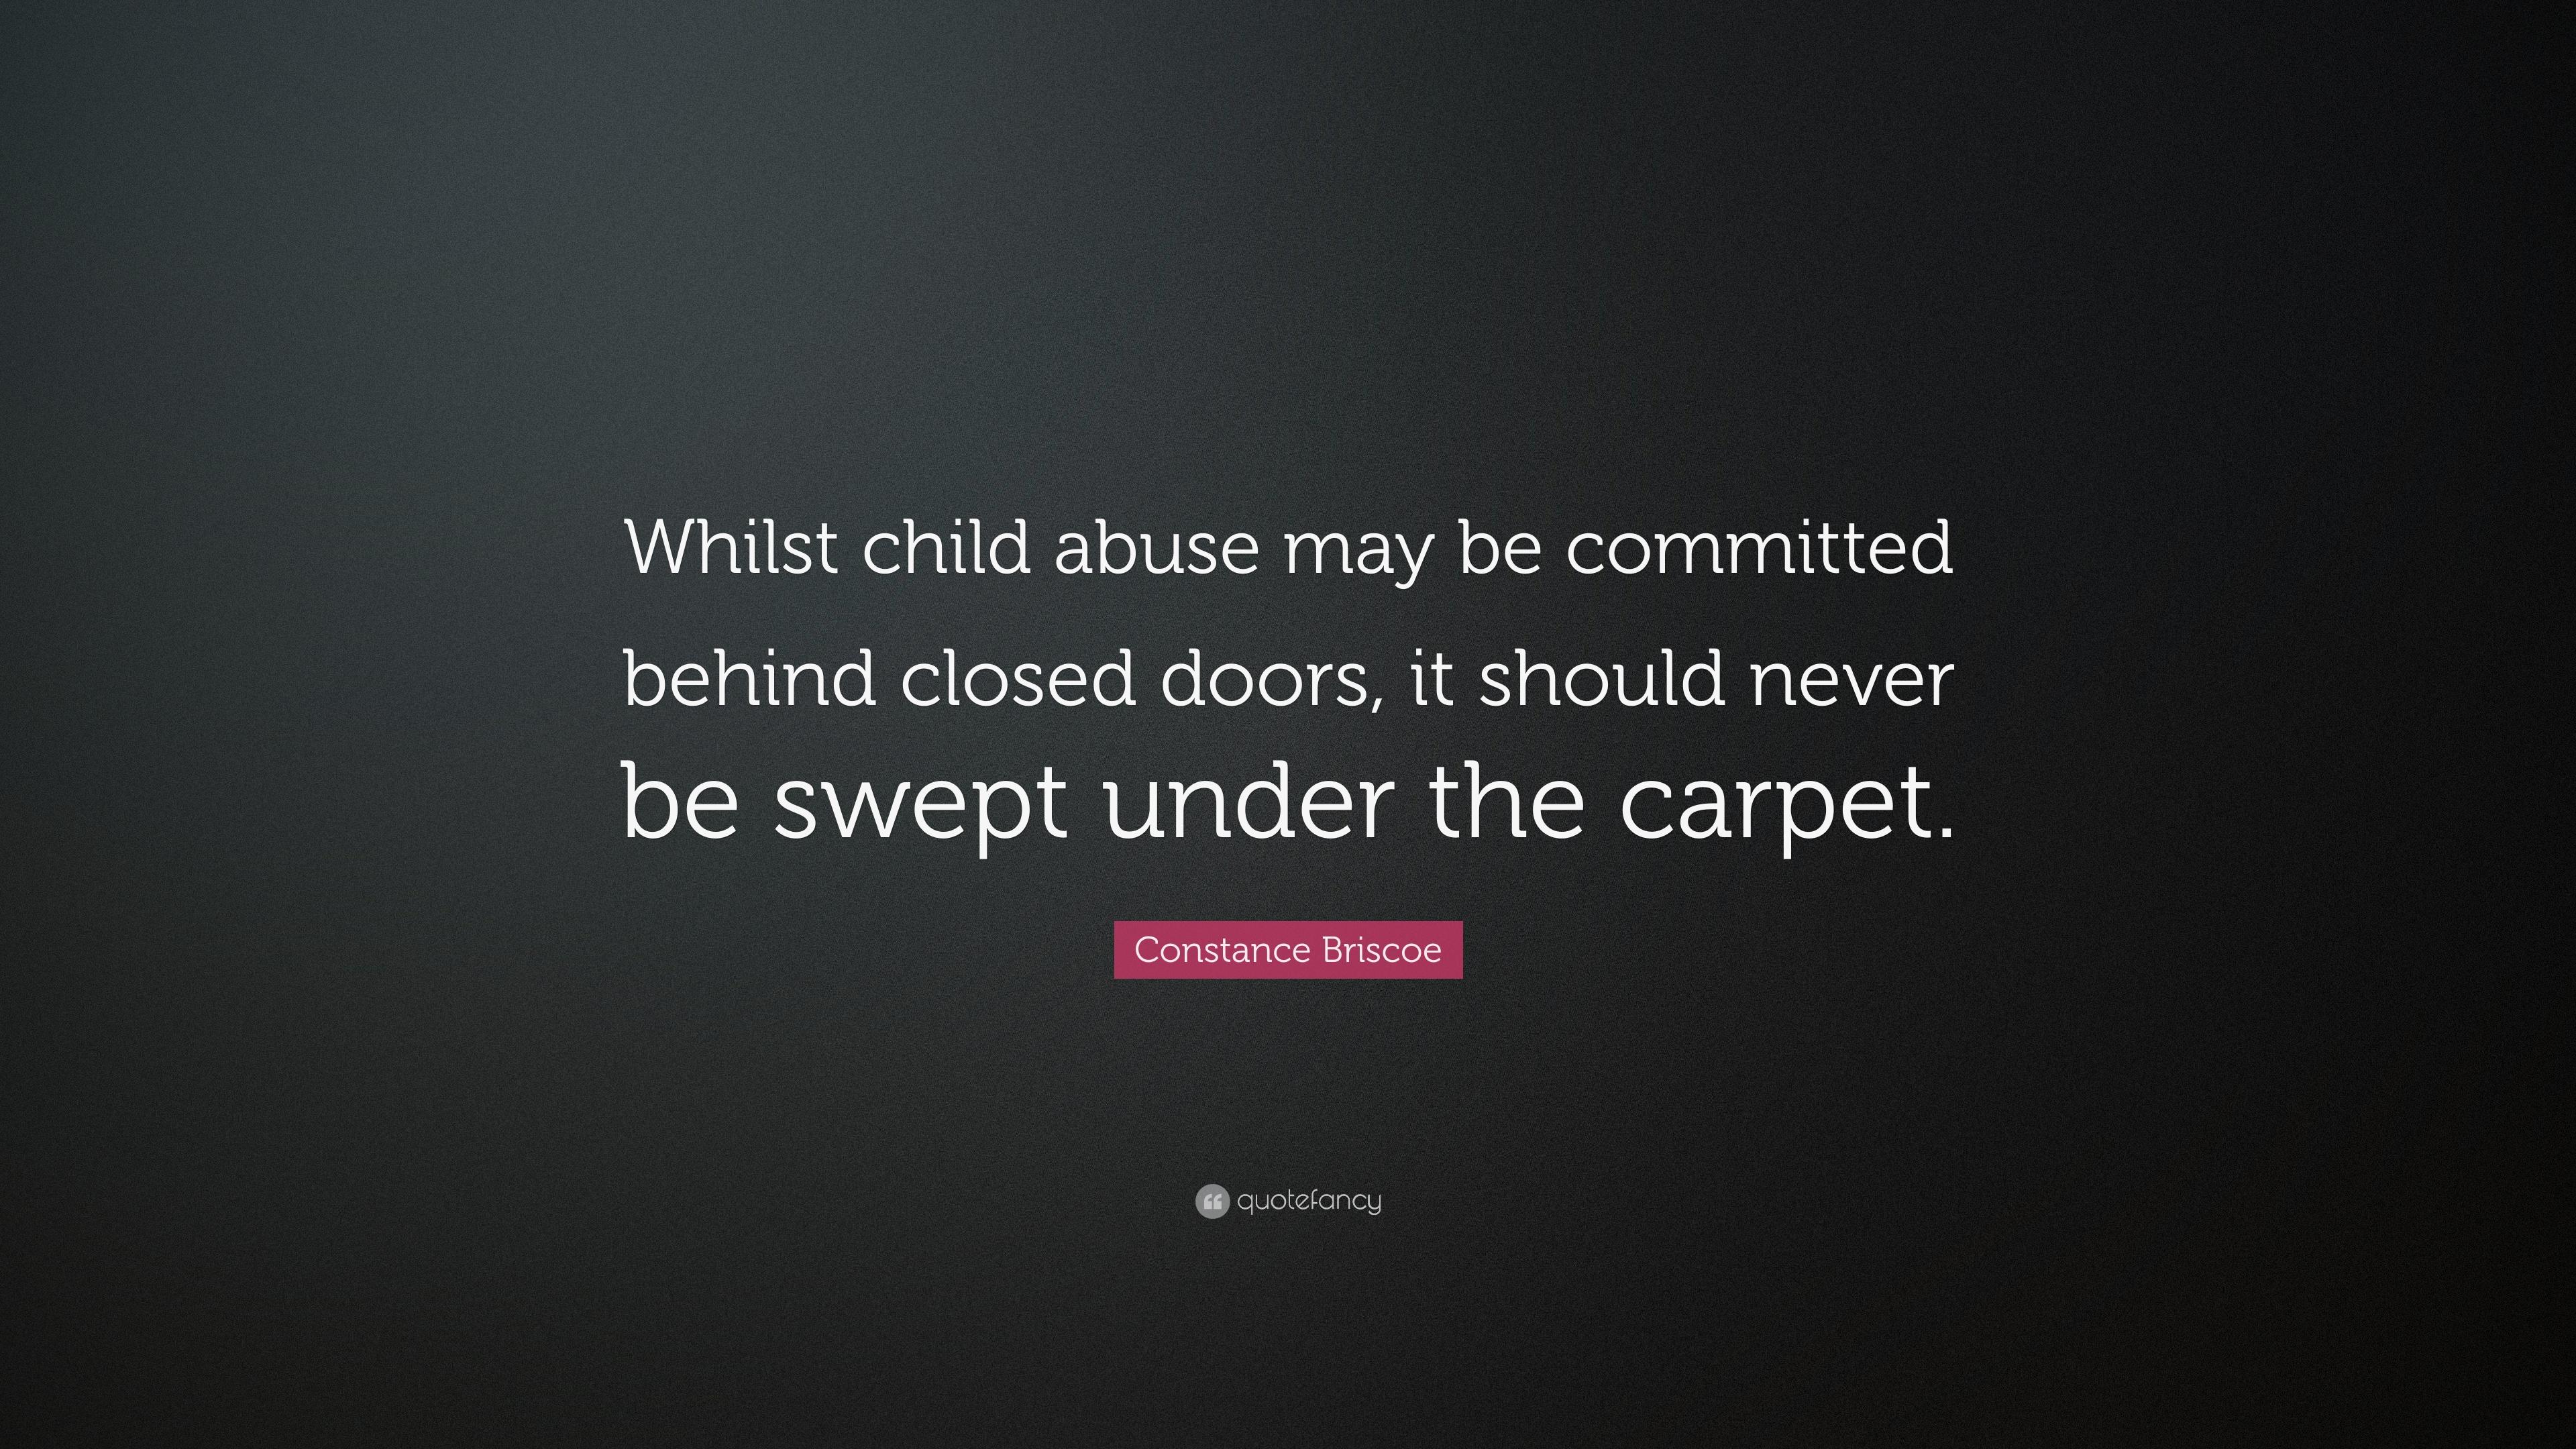 Constance Briscoe Quote: “Whilst child abuse may be committed behind